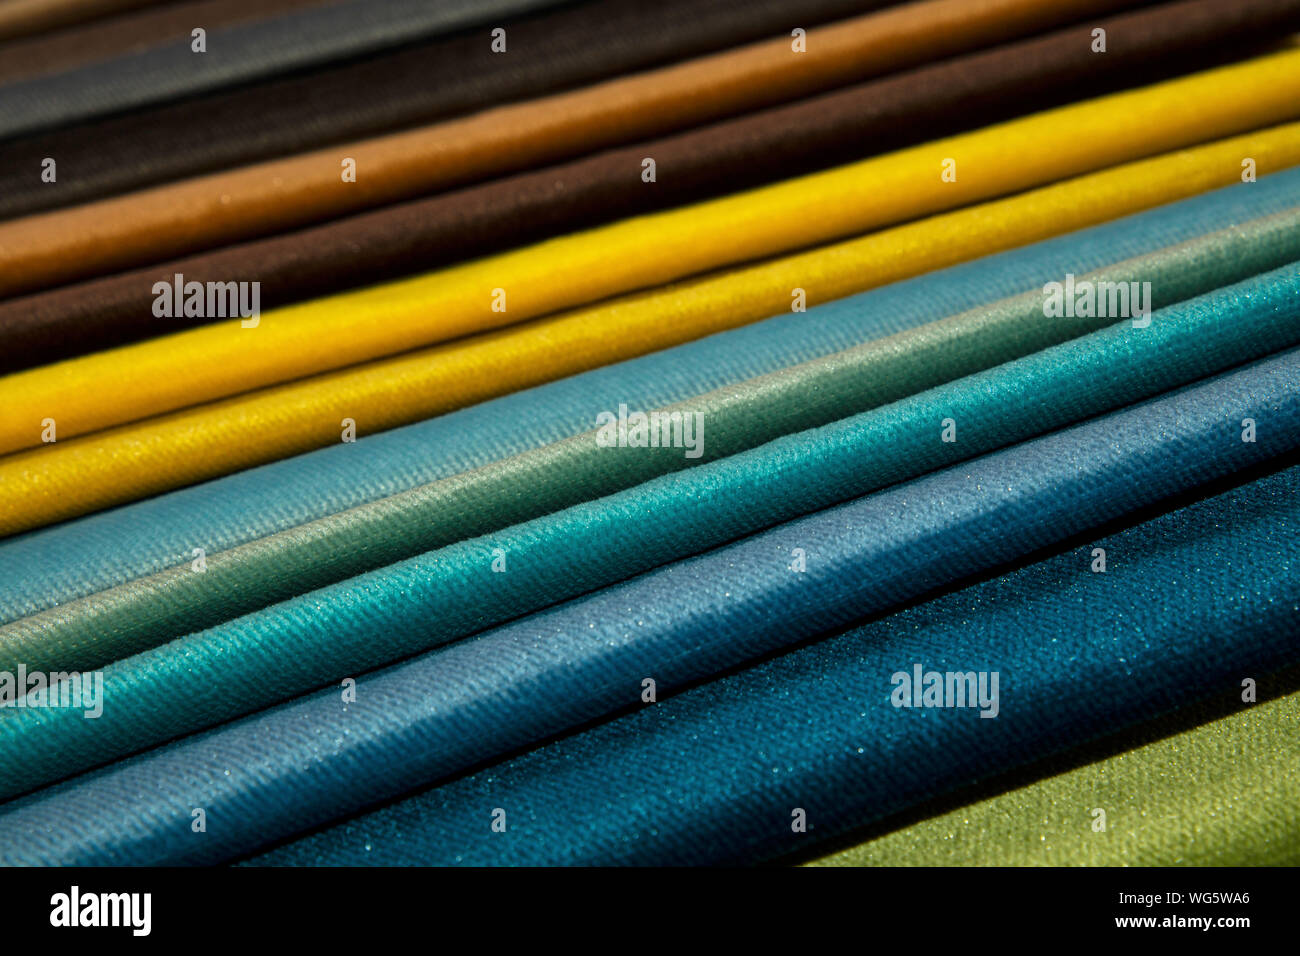 Full Frame Image Of Multi Color Textile Stock Photo